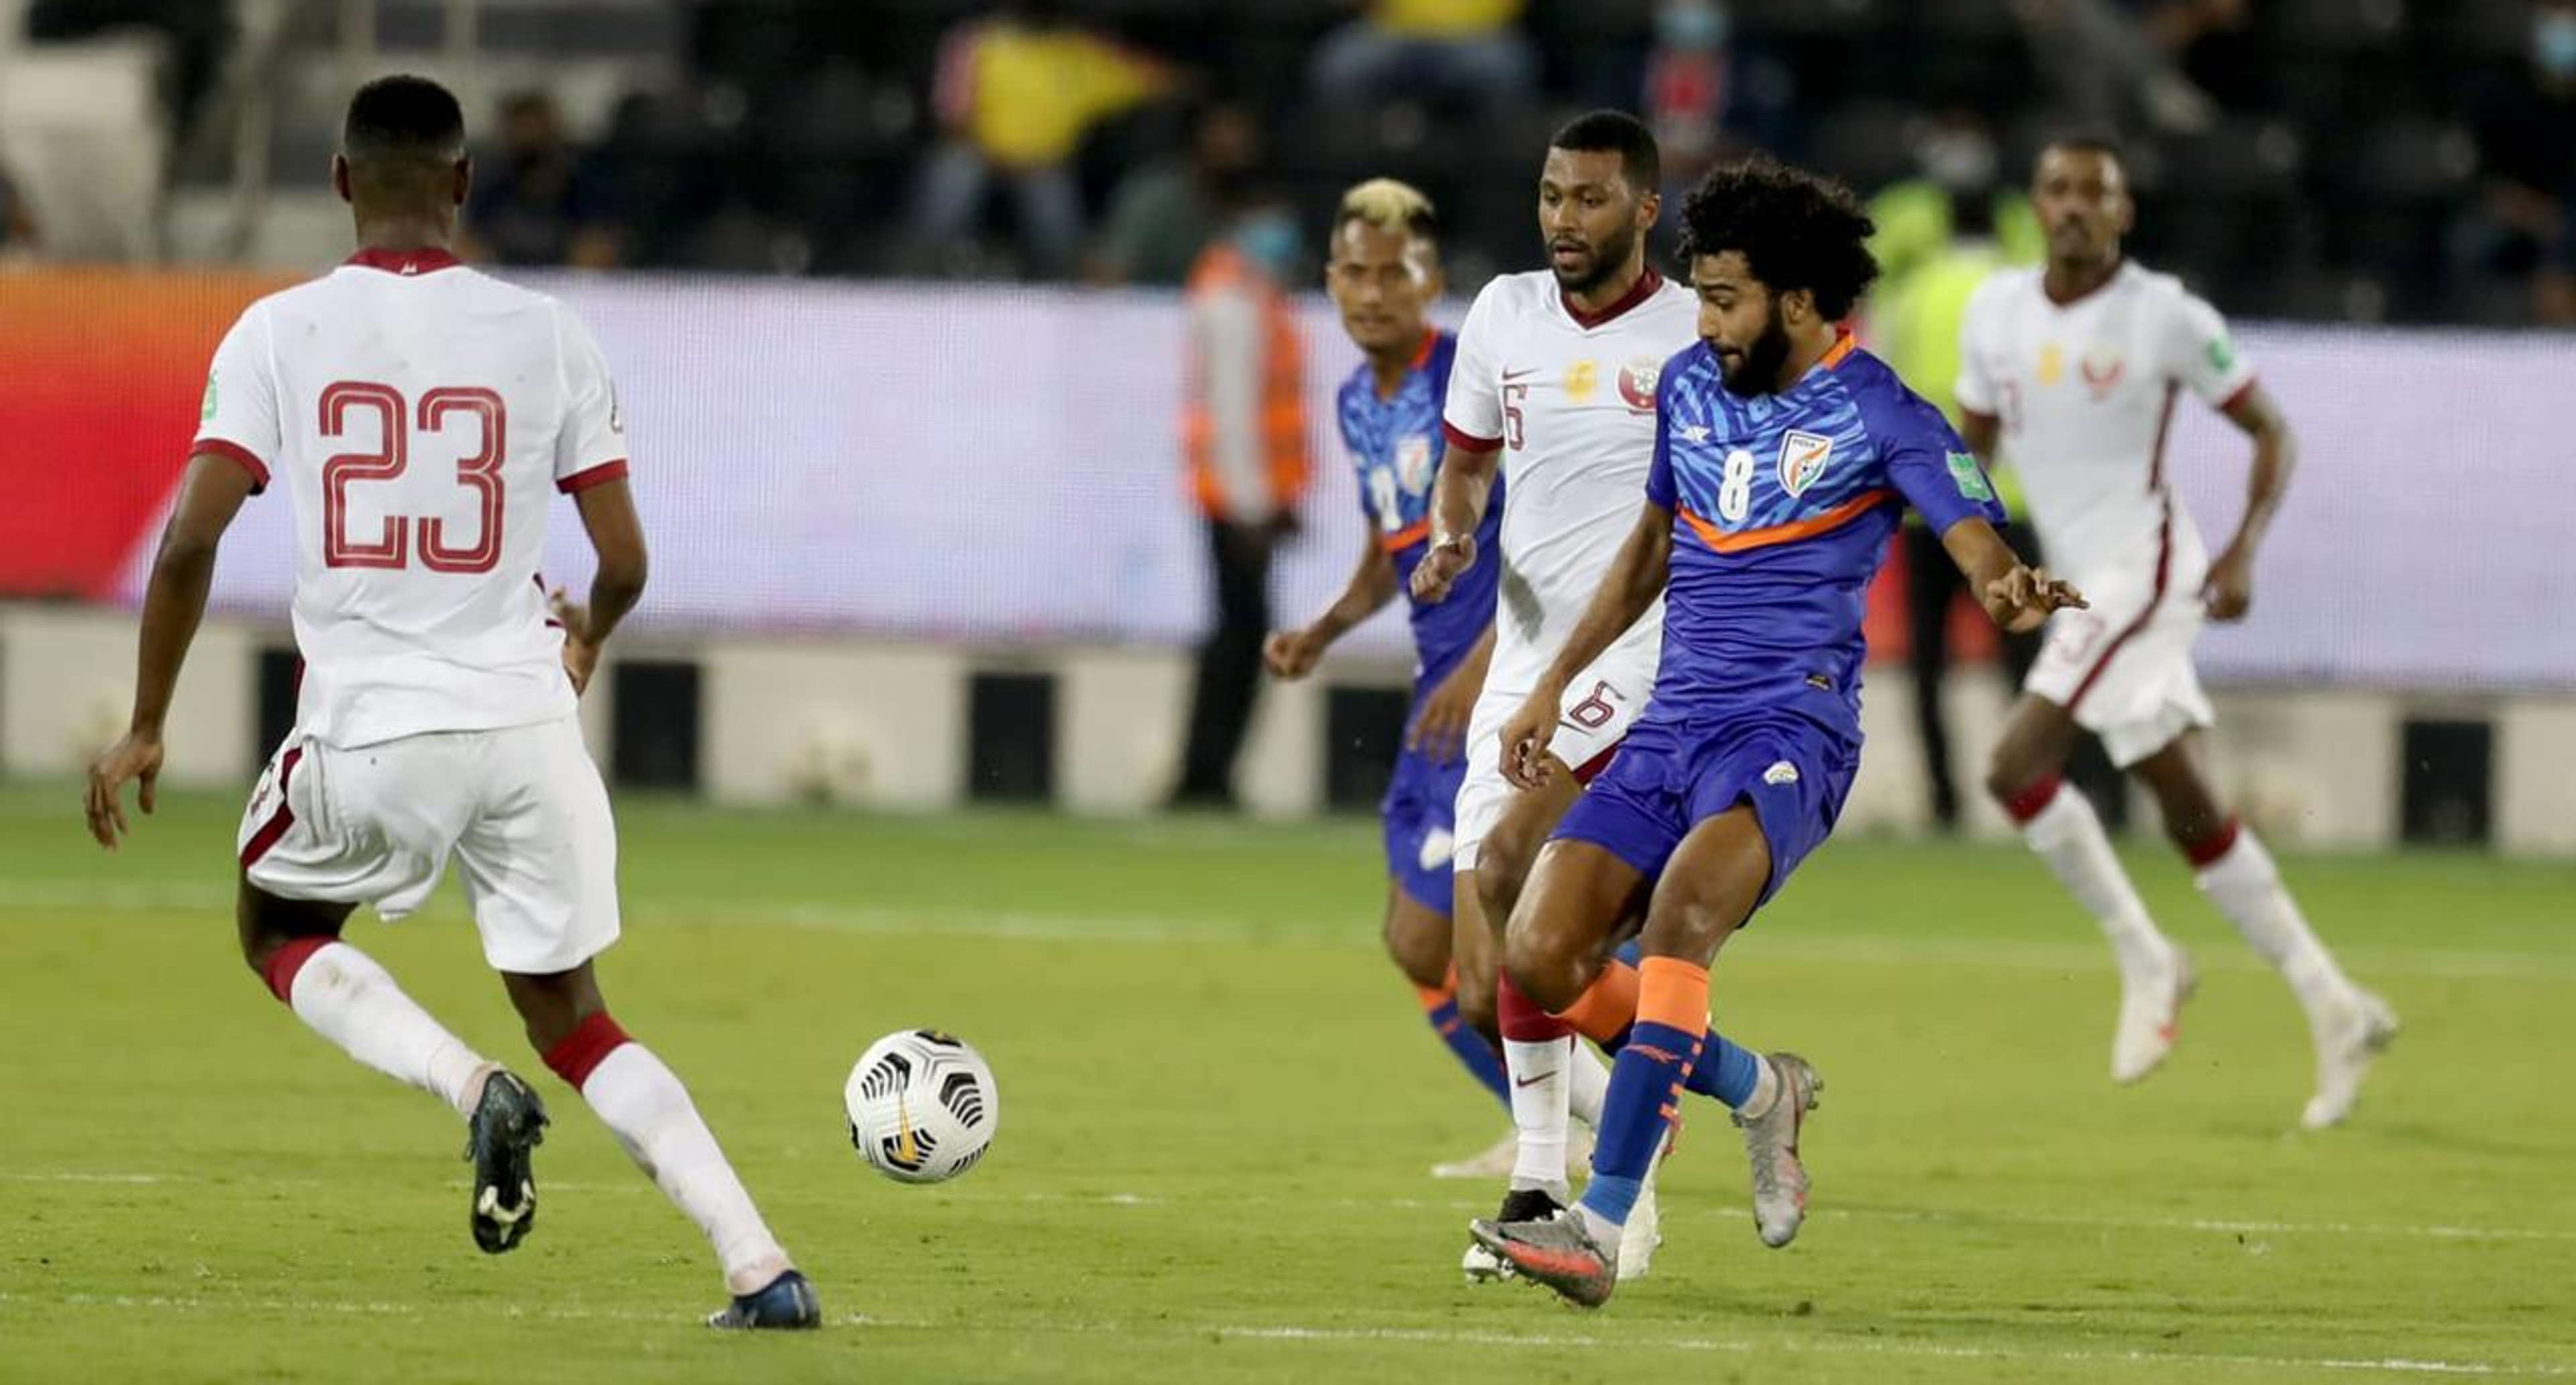 India's Glan Martins fighting for the ball against Qatar